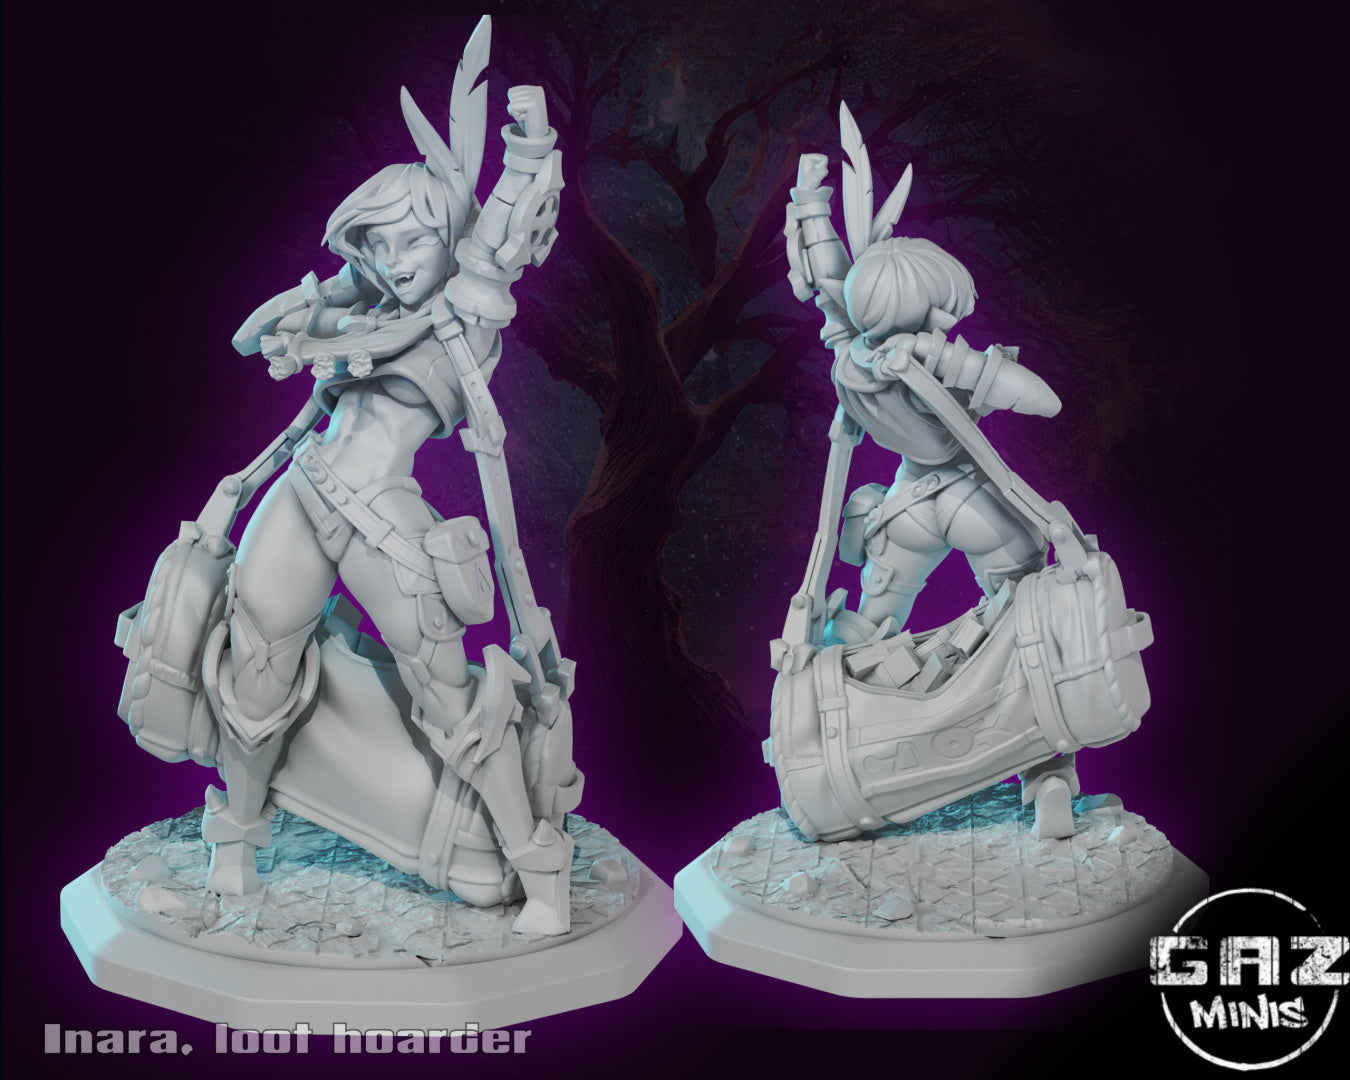 Irena the Loot Hoarder from GAZ Minis